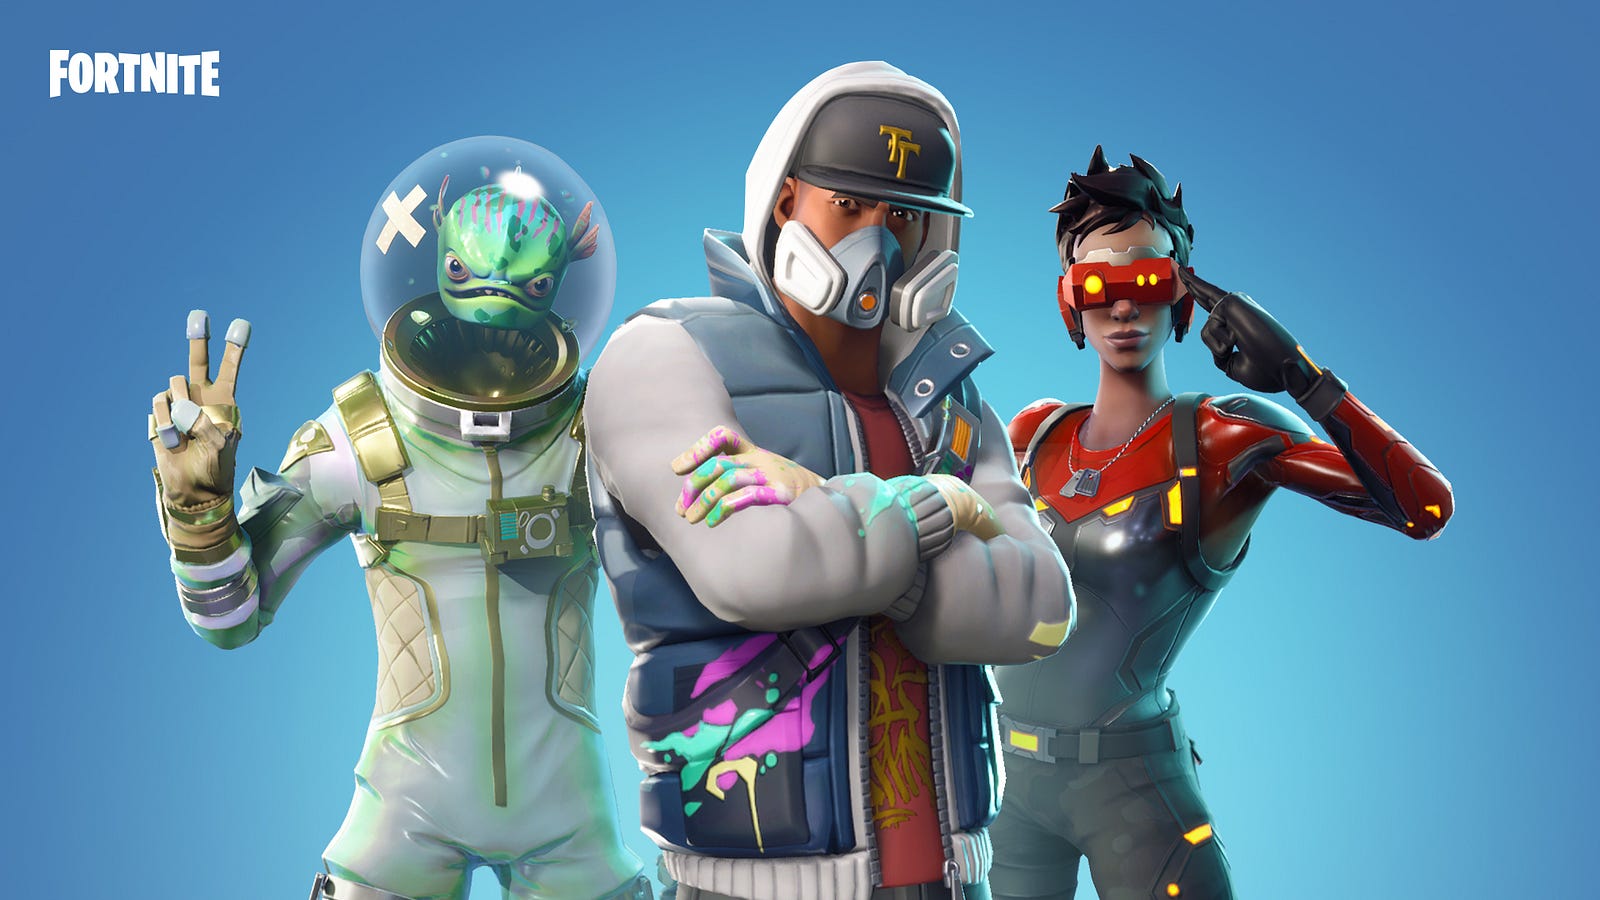 how will fortnite play out as an esport the popular battle royale game - games just like fortnite unblocked